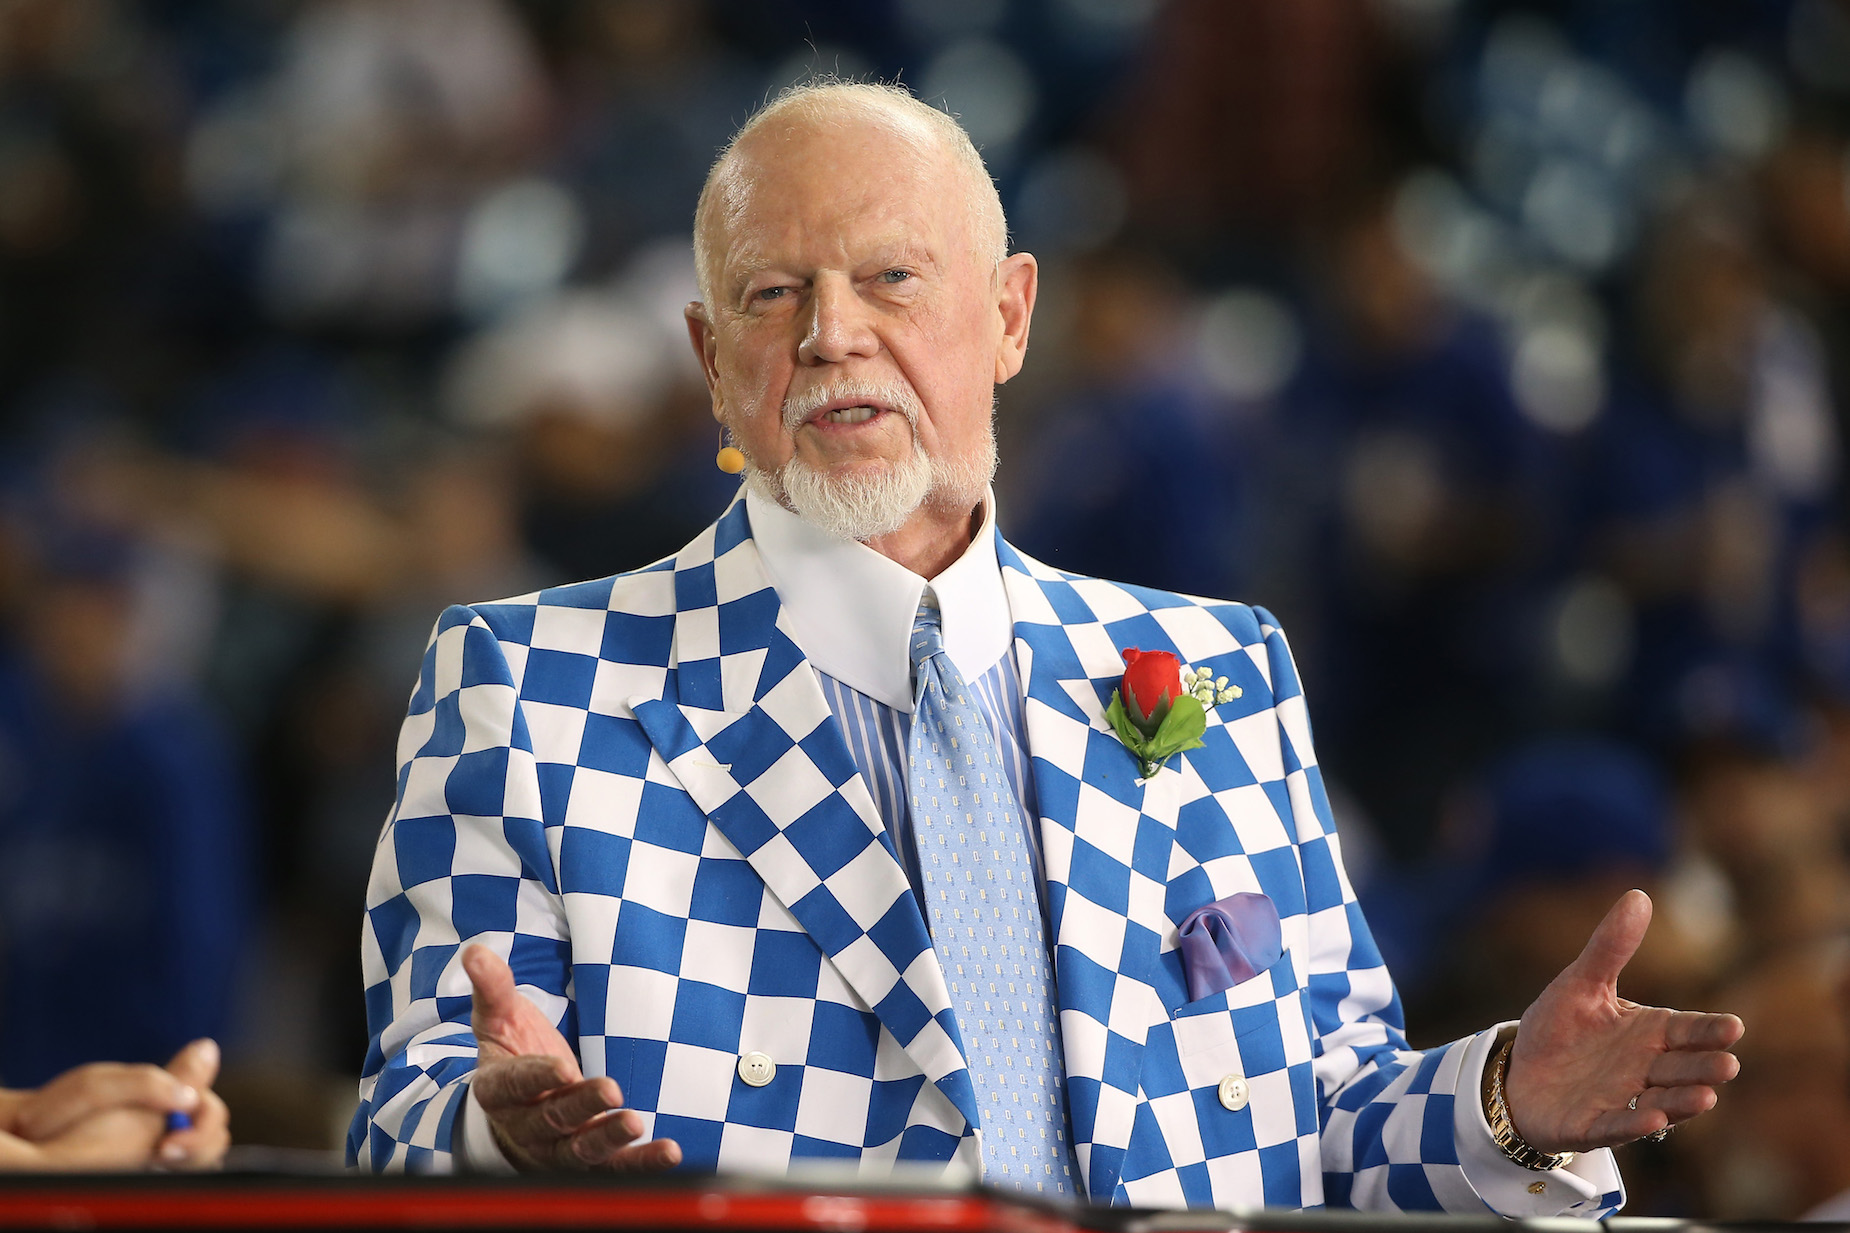 What Happened to Don Cherry After He Lost His Job on ‘Hockey Night in Canada’?